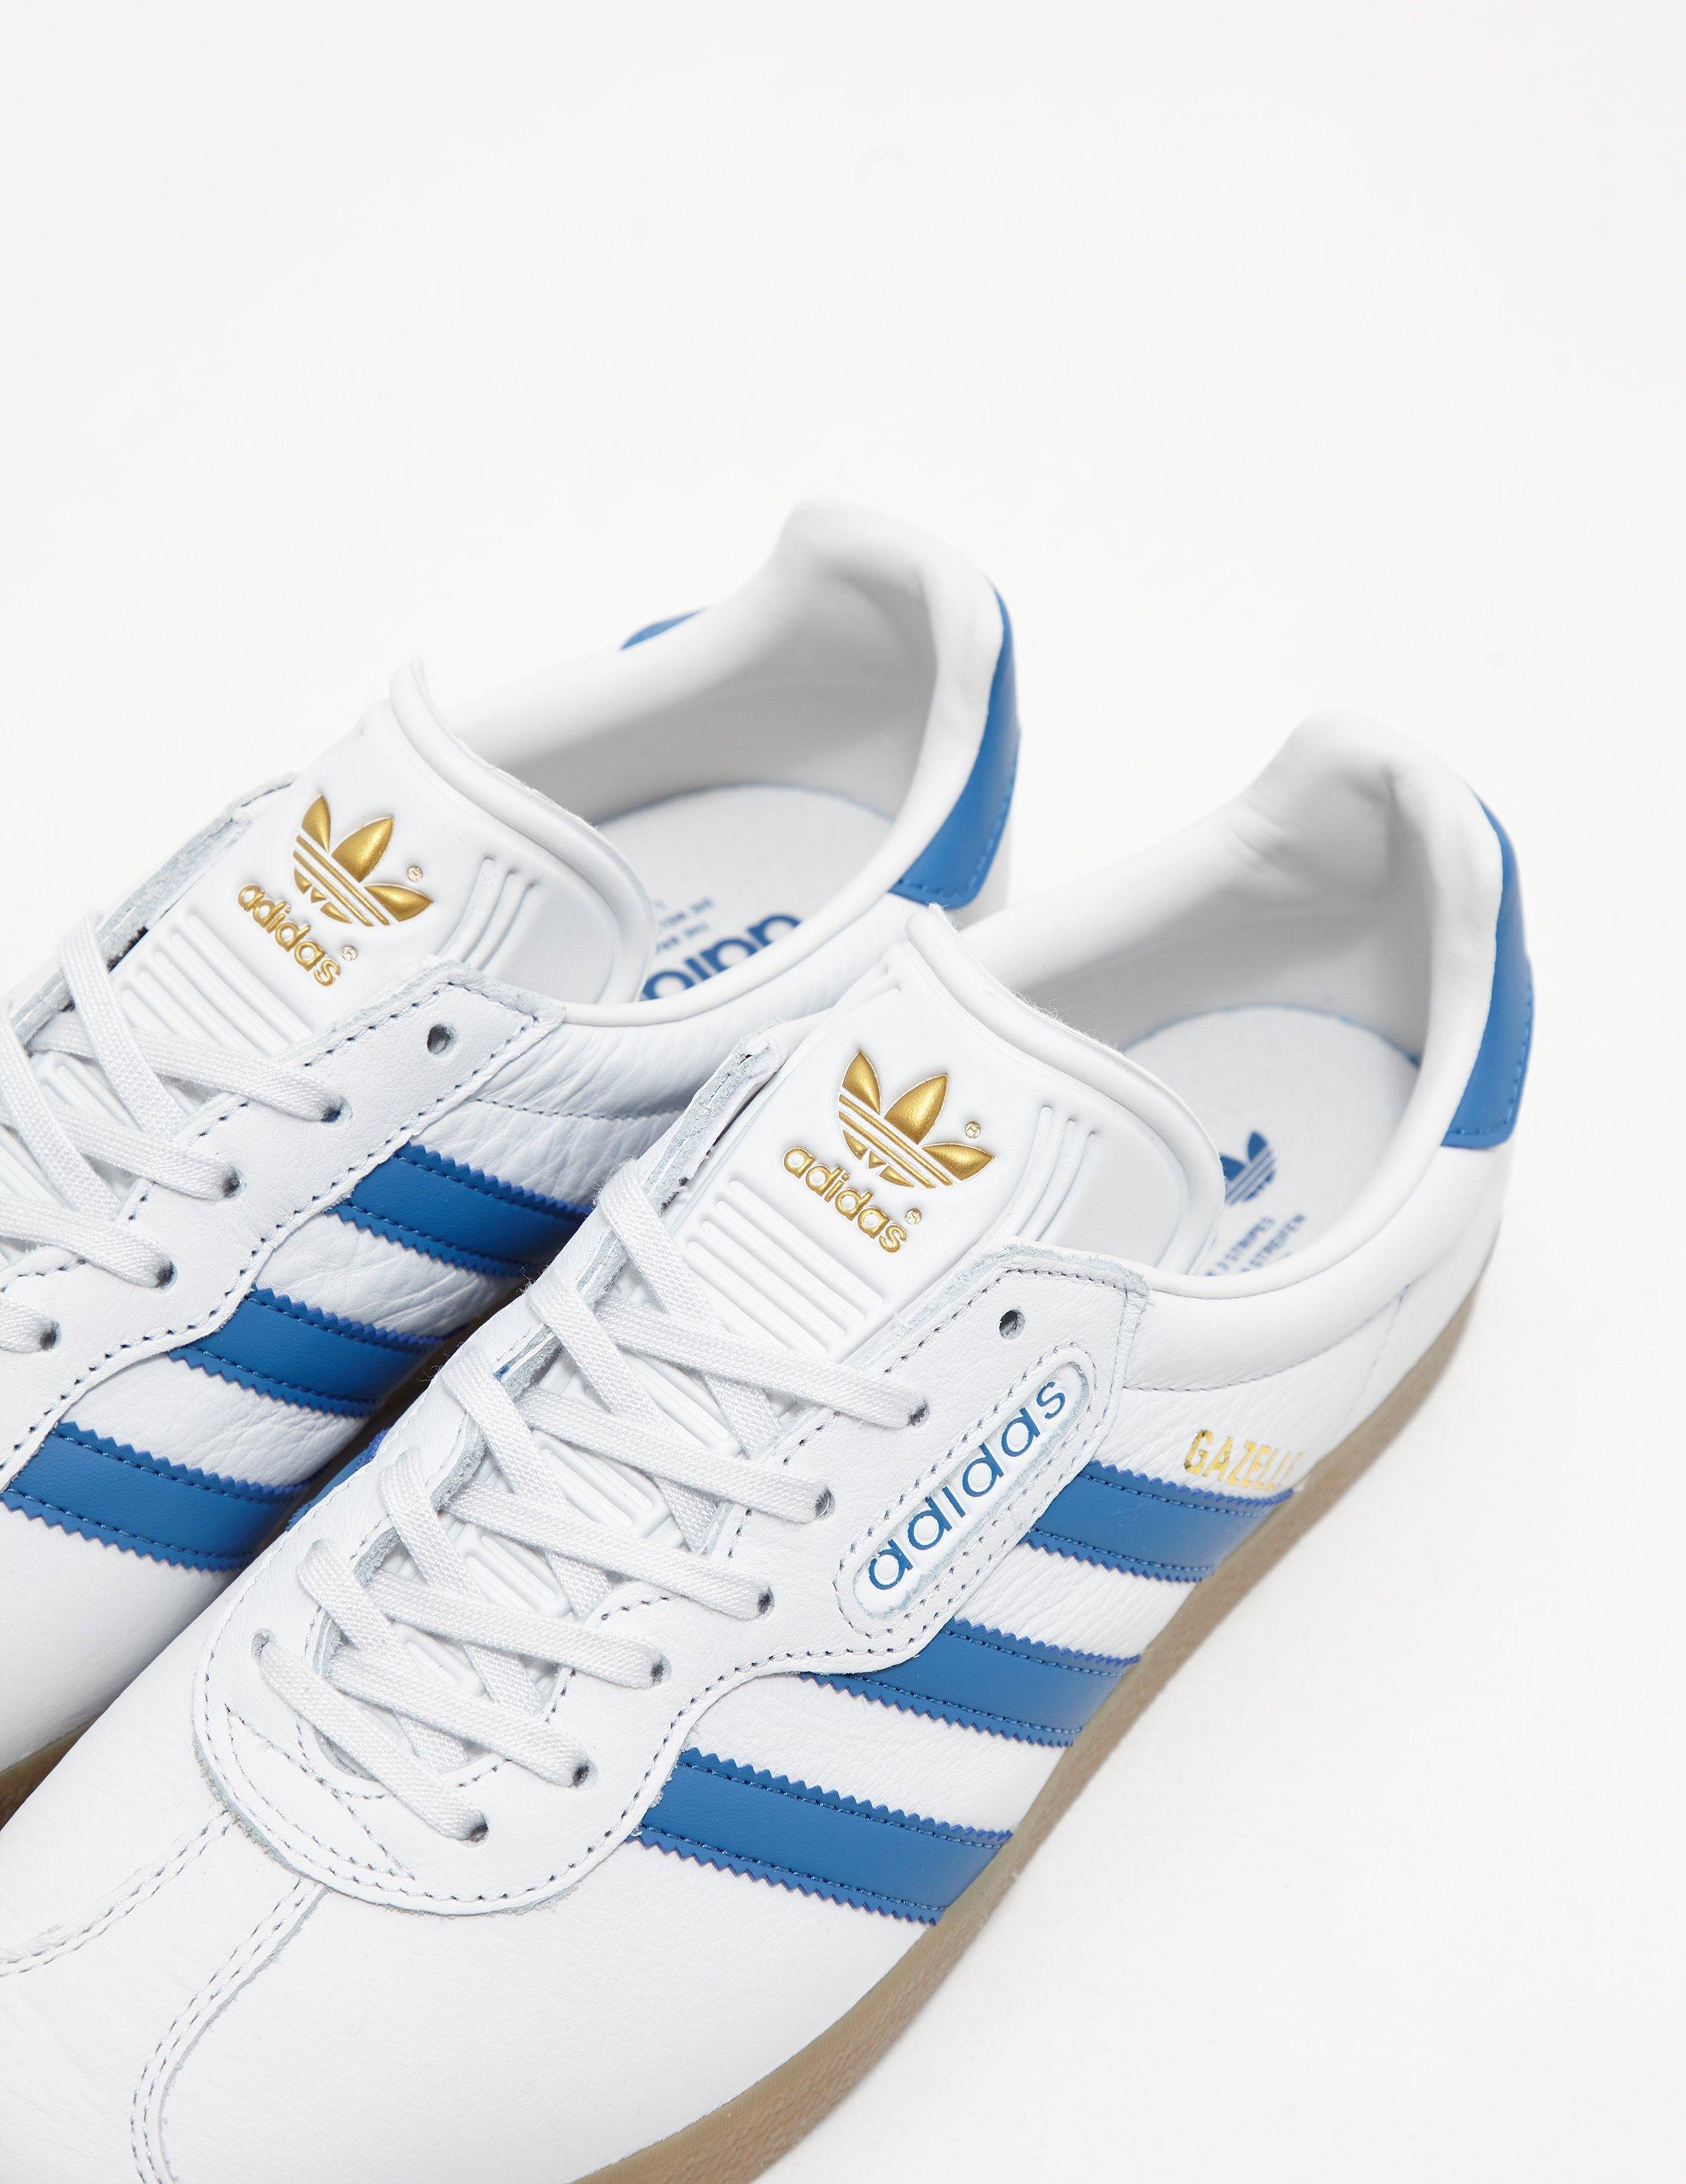 Adidas Originals Gazelle Super Sneakers In White And Blue | atelier ...